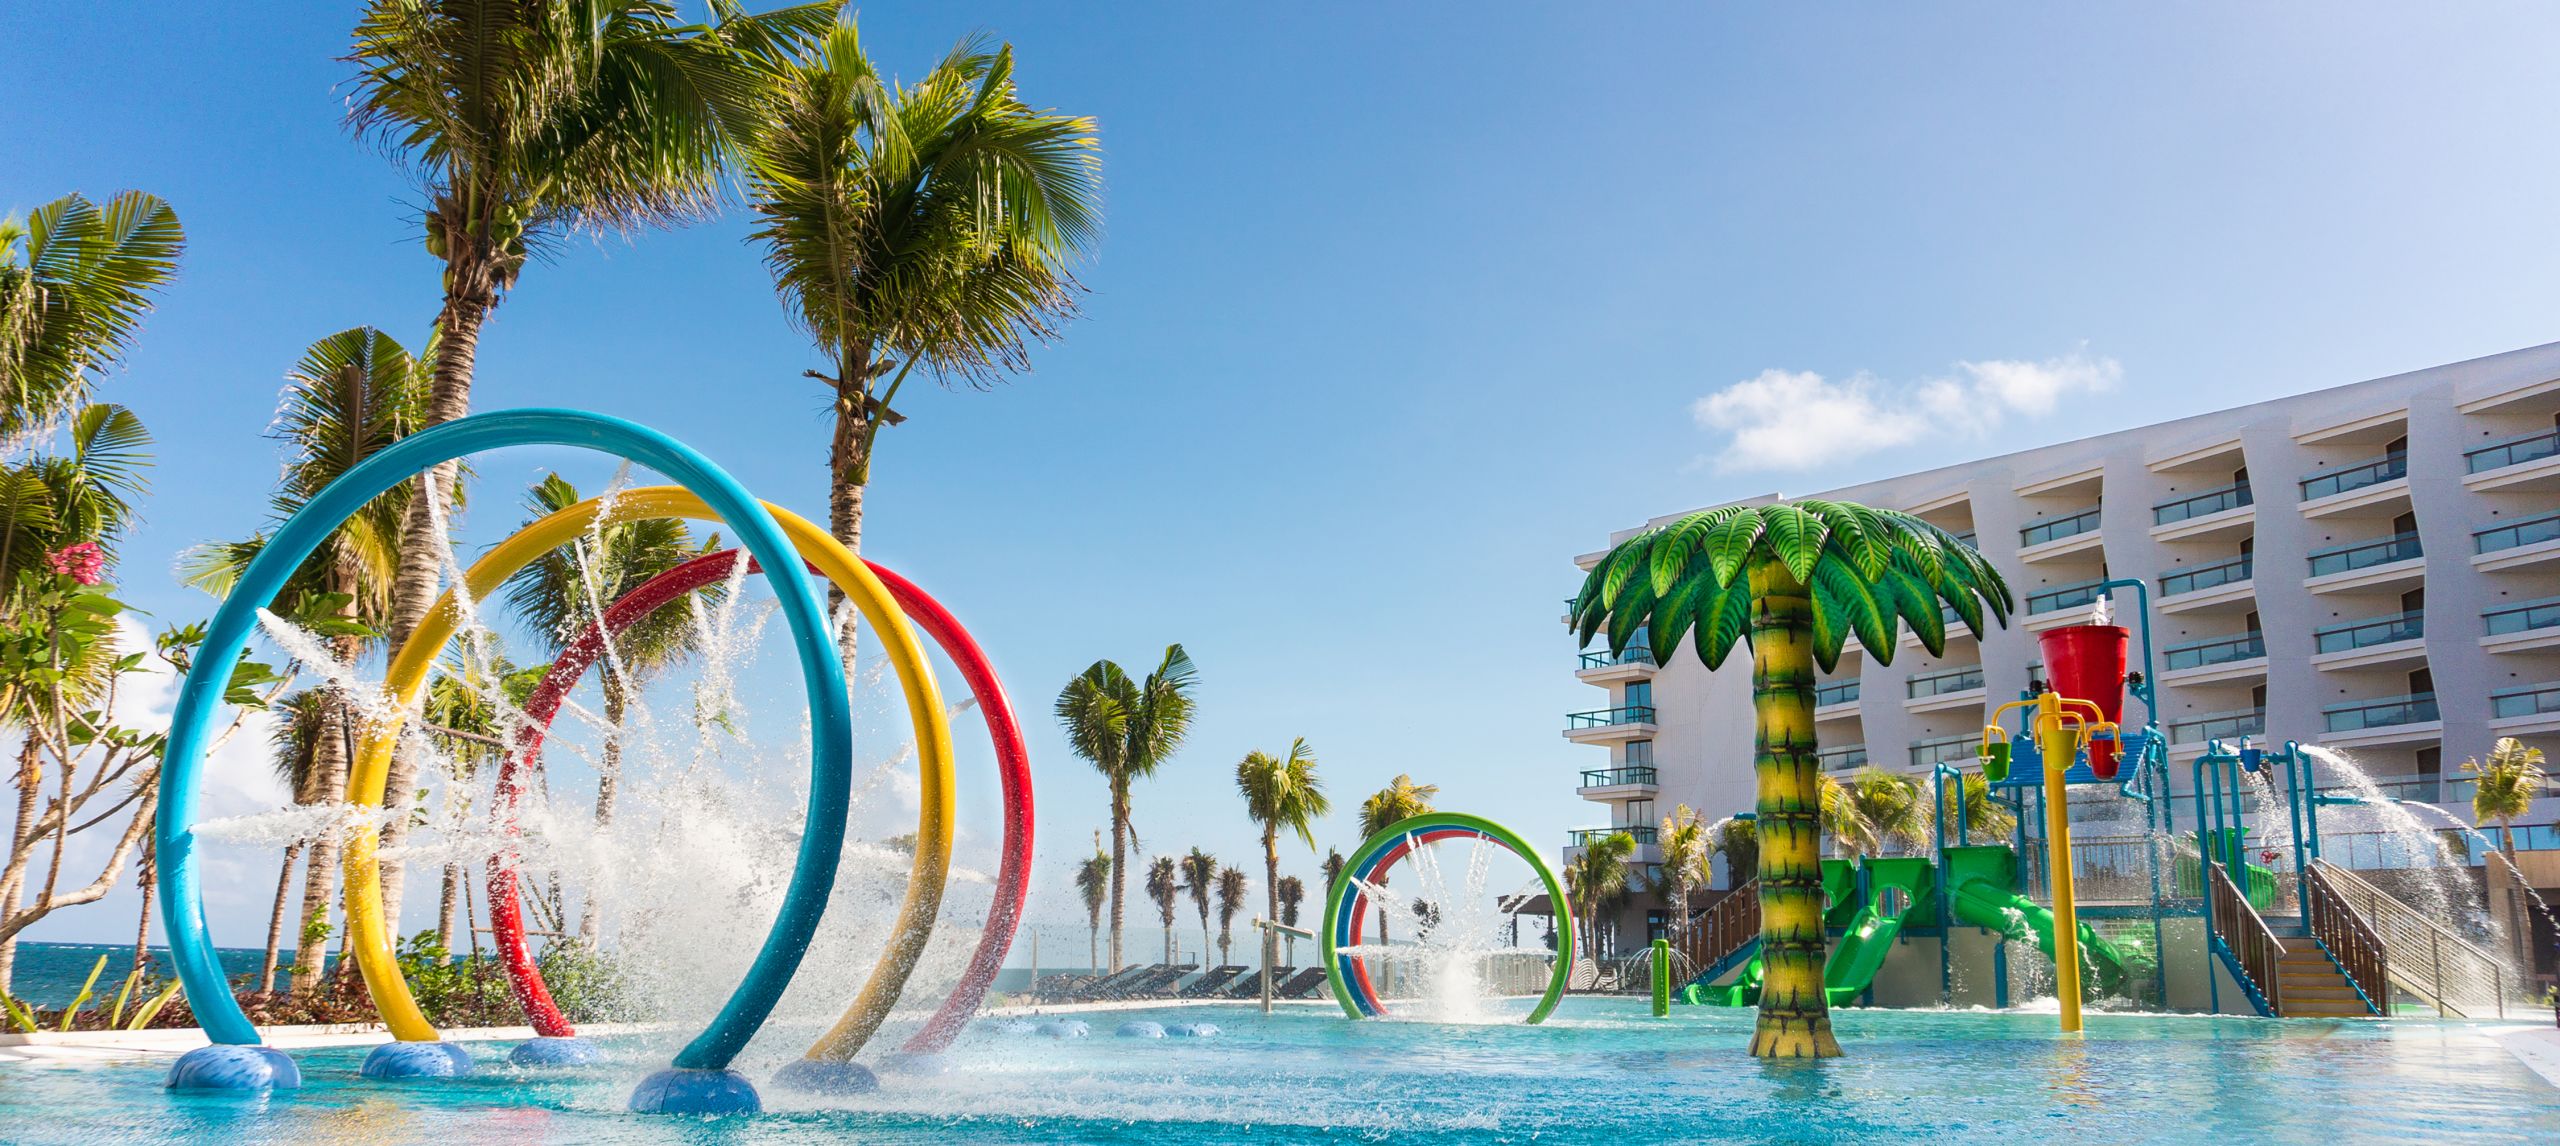 Outdoor pool with colorful hoops